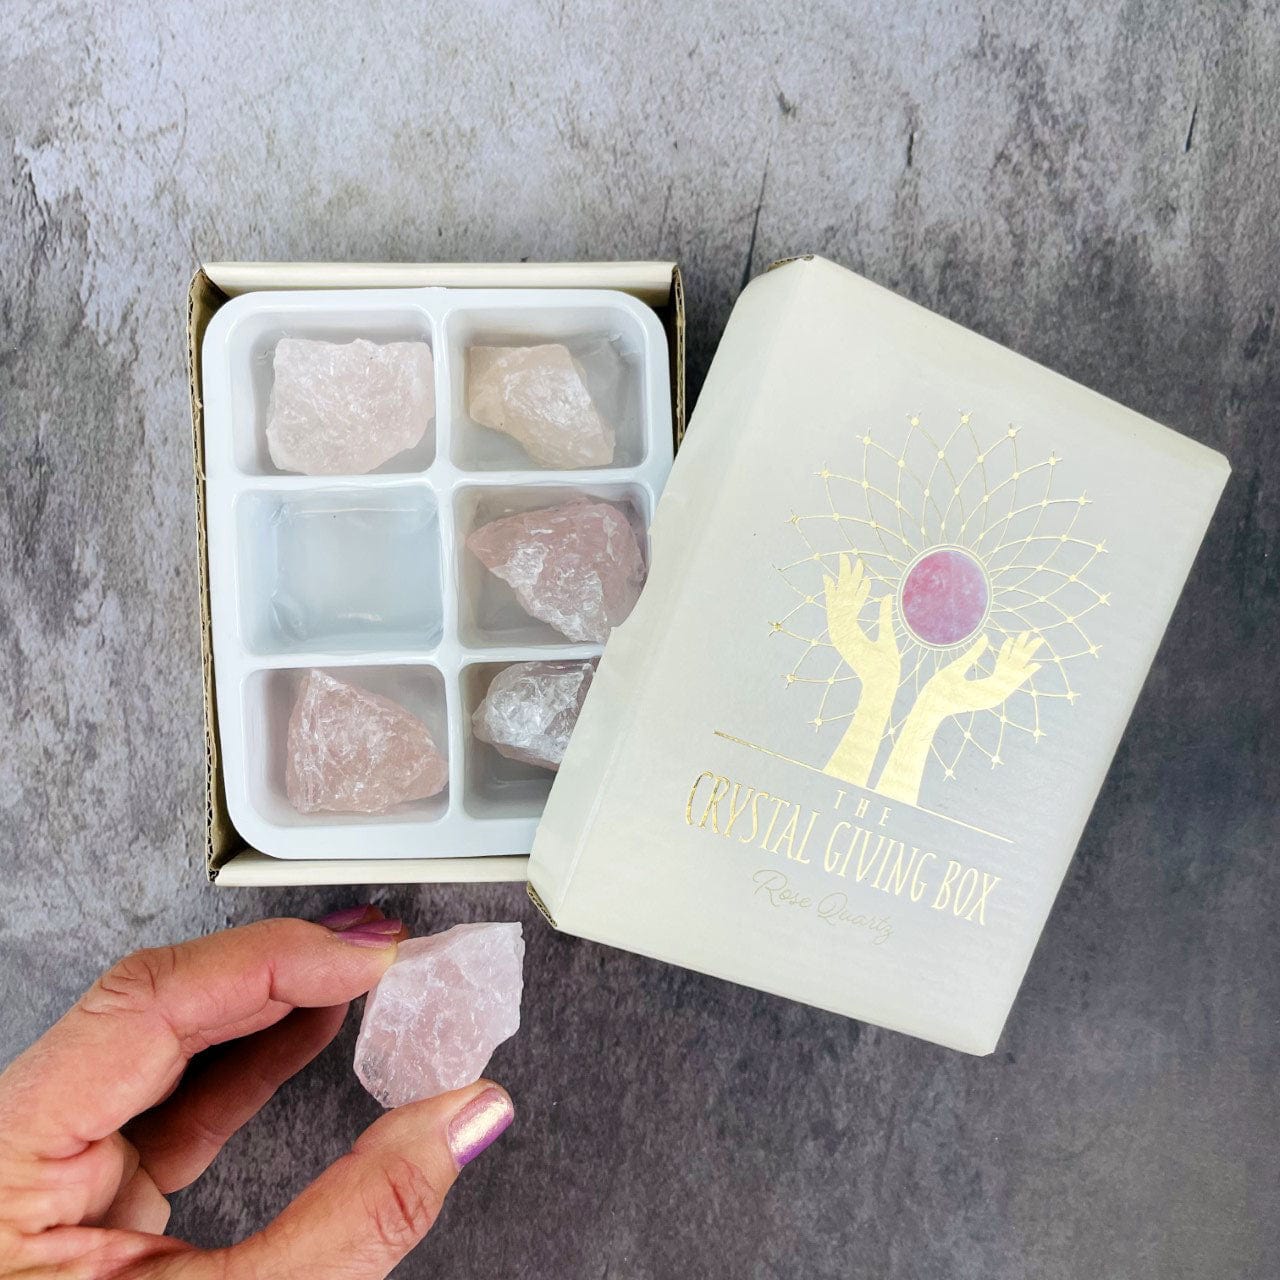 Crystal Giving Box - Set of 6 rose quartz stones with 1 stone in a hand